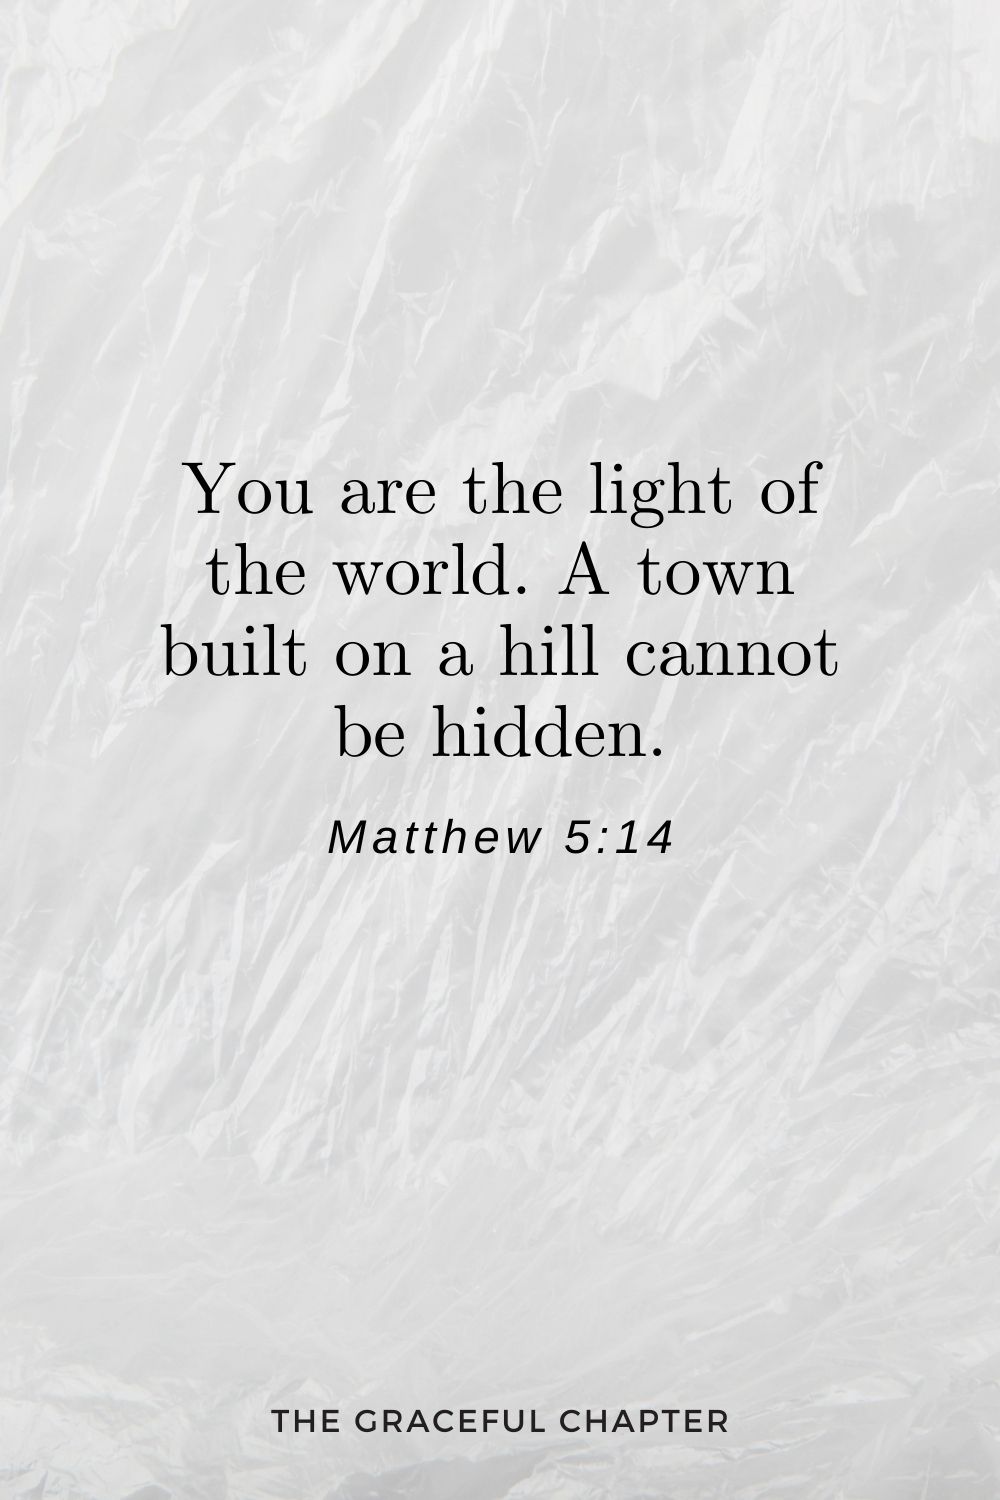 You are the light of the world. A town built on a hill cannot be hidden. Matthew 5:14